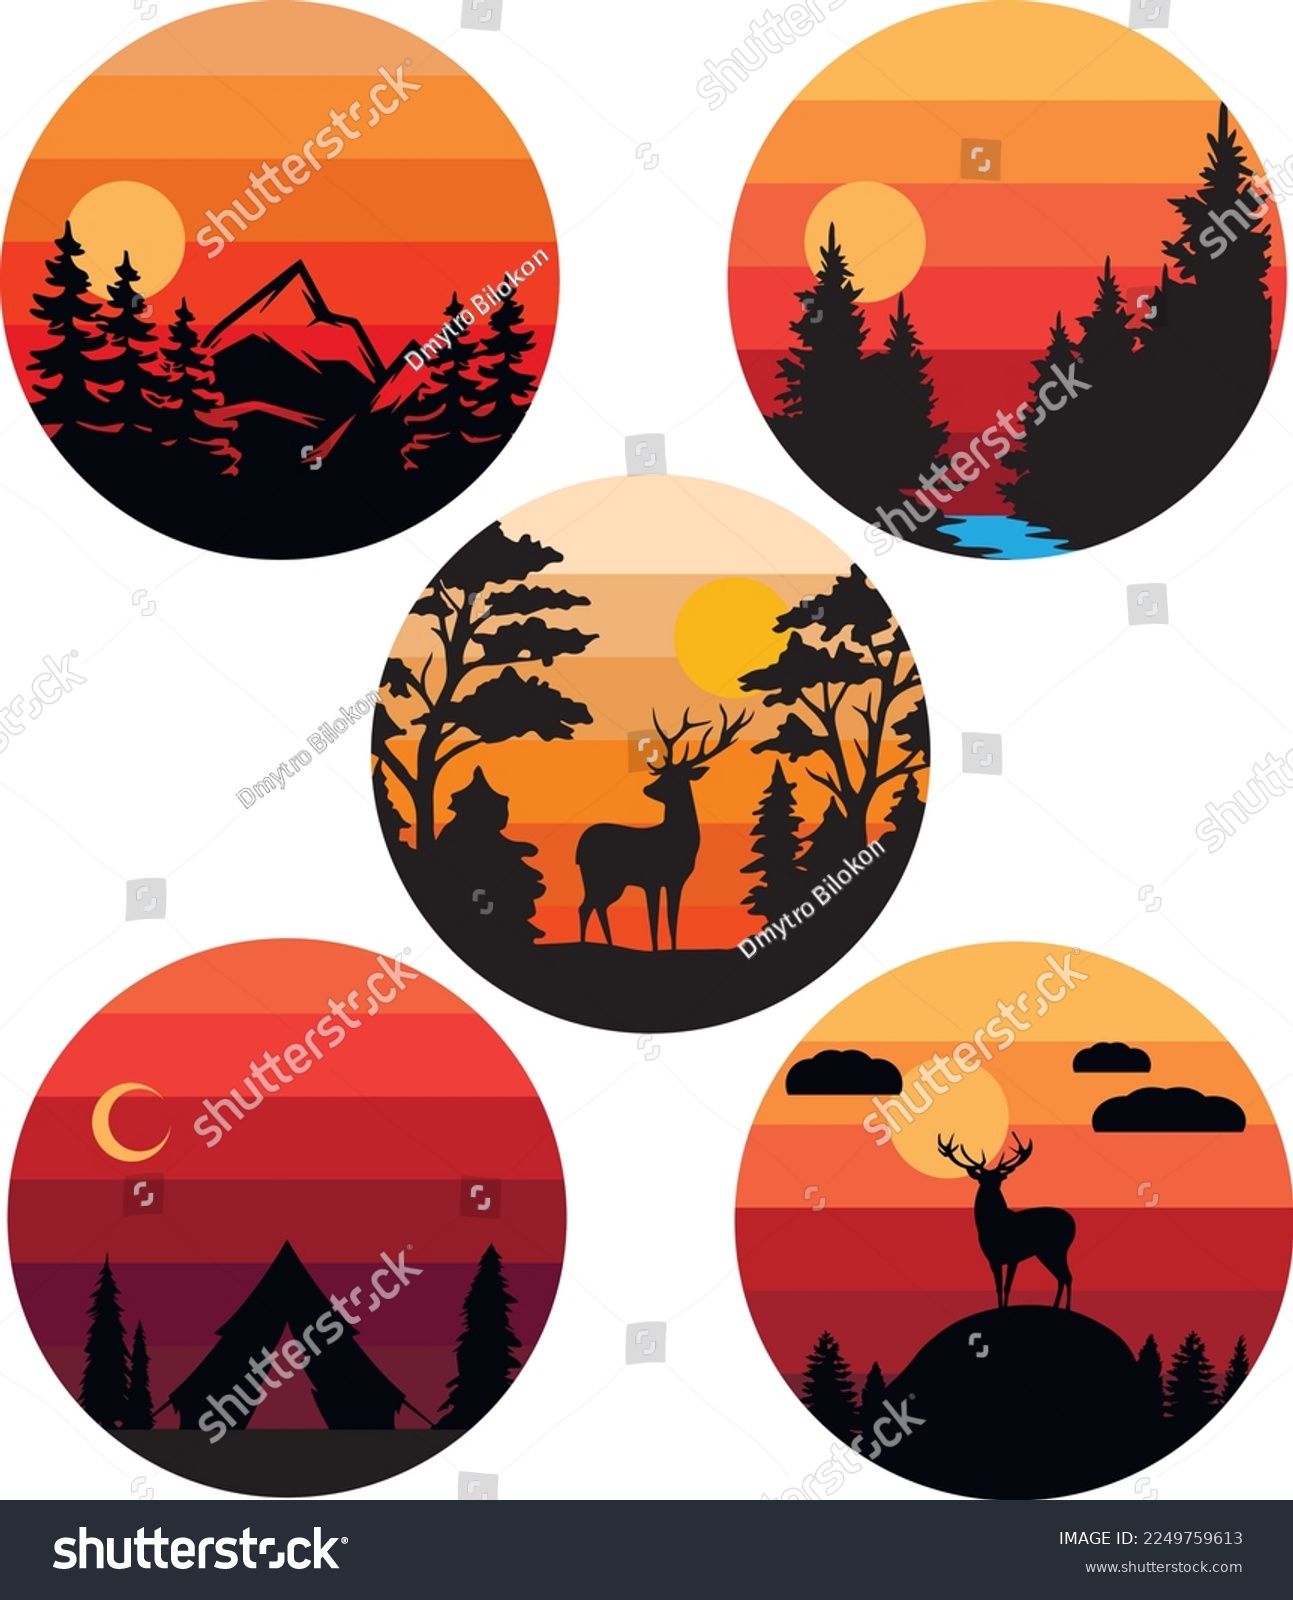 SVG of Sunset mountains and forest retro design set, vintage sunset in 80s style, mountains, forest, river, deer, SVG Vector svg